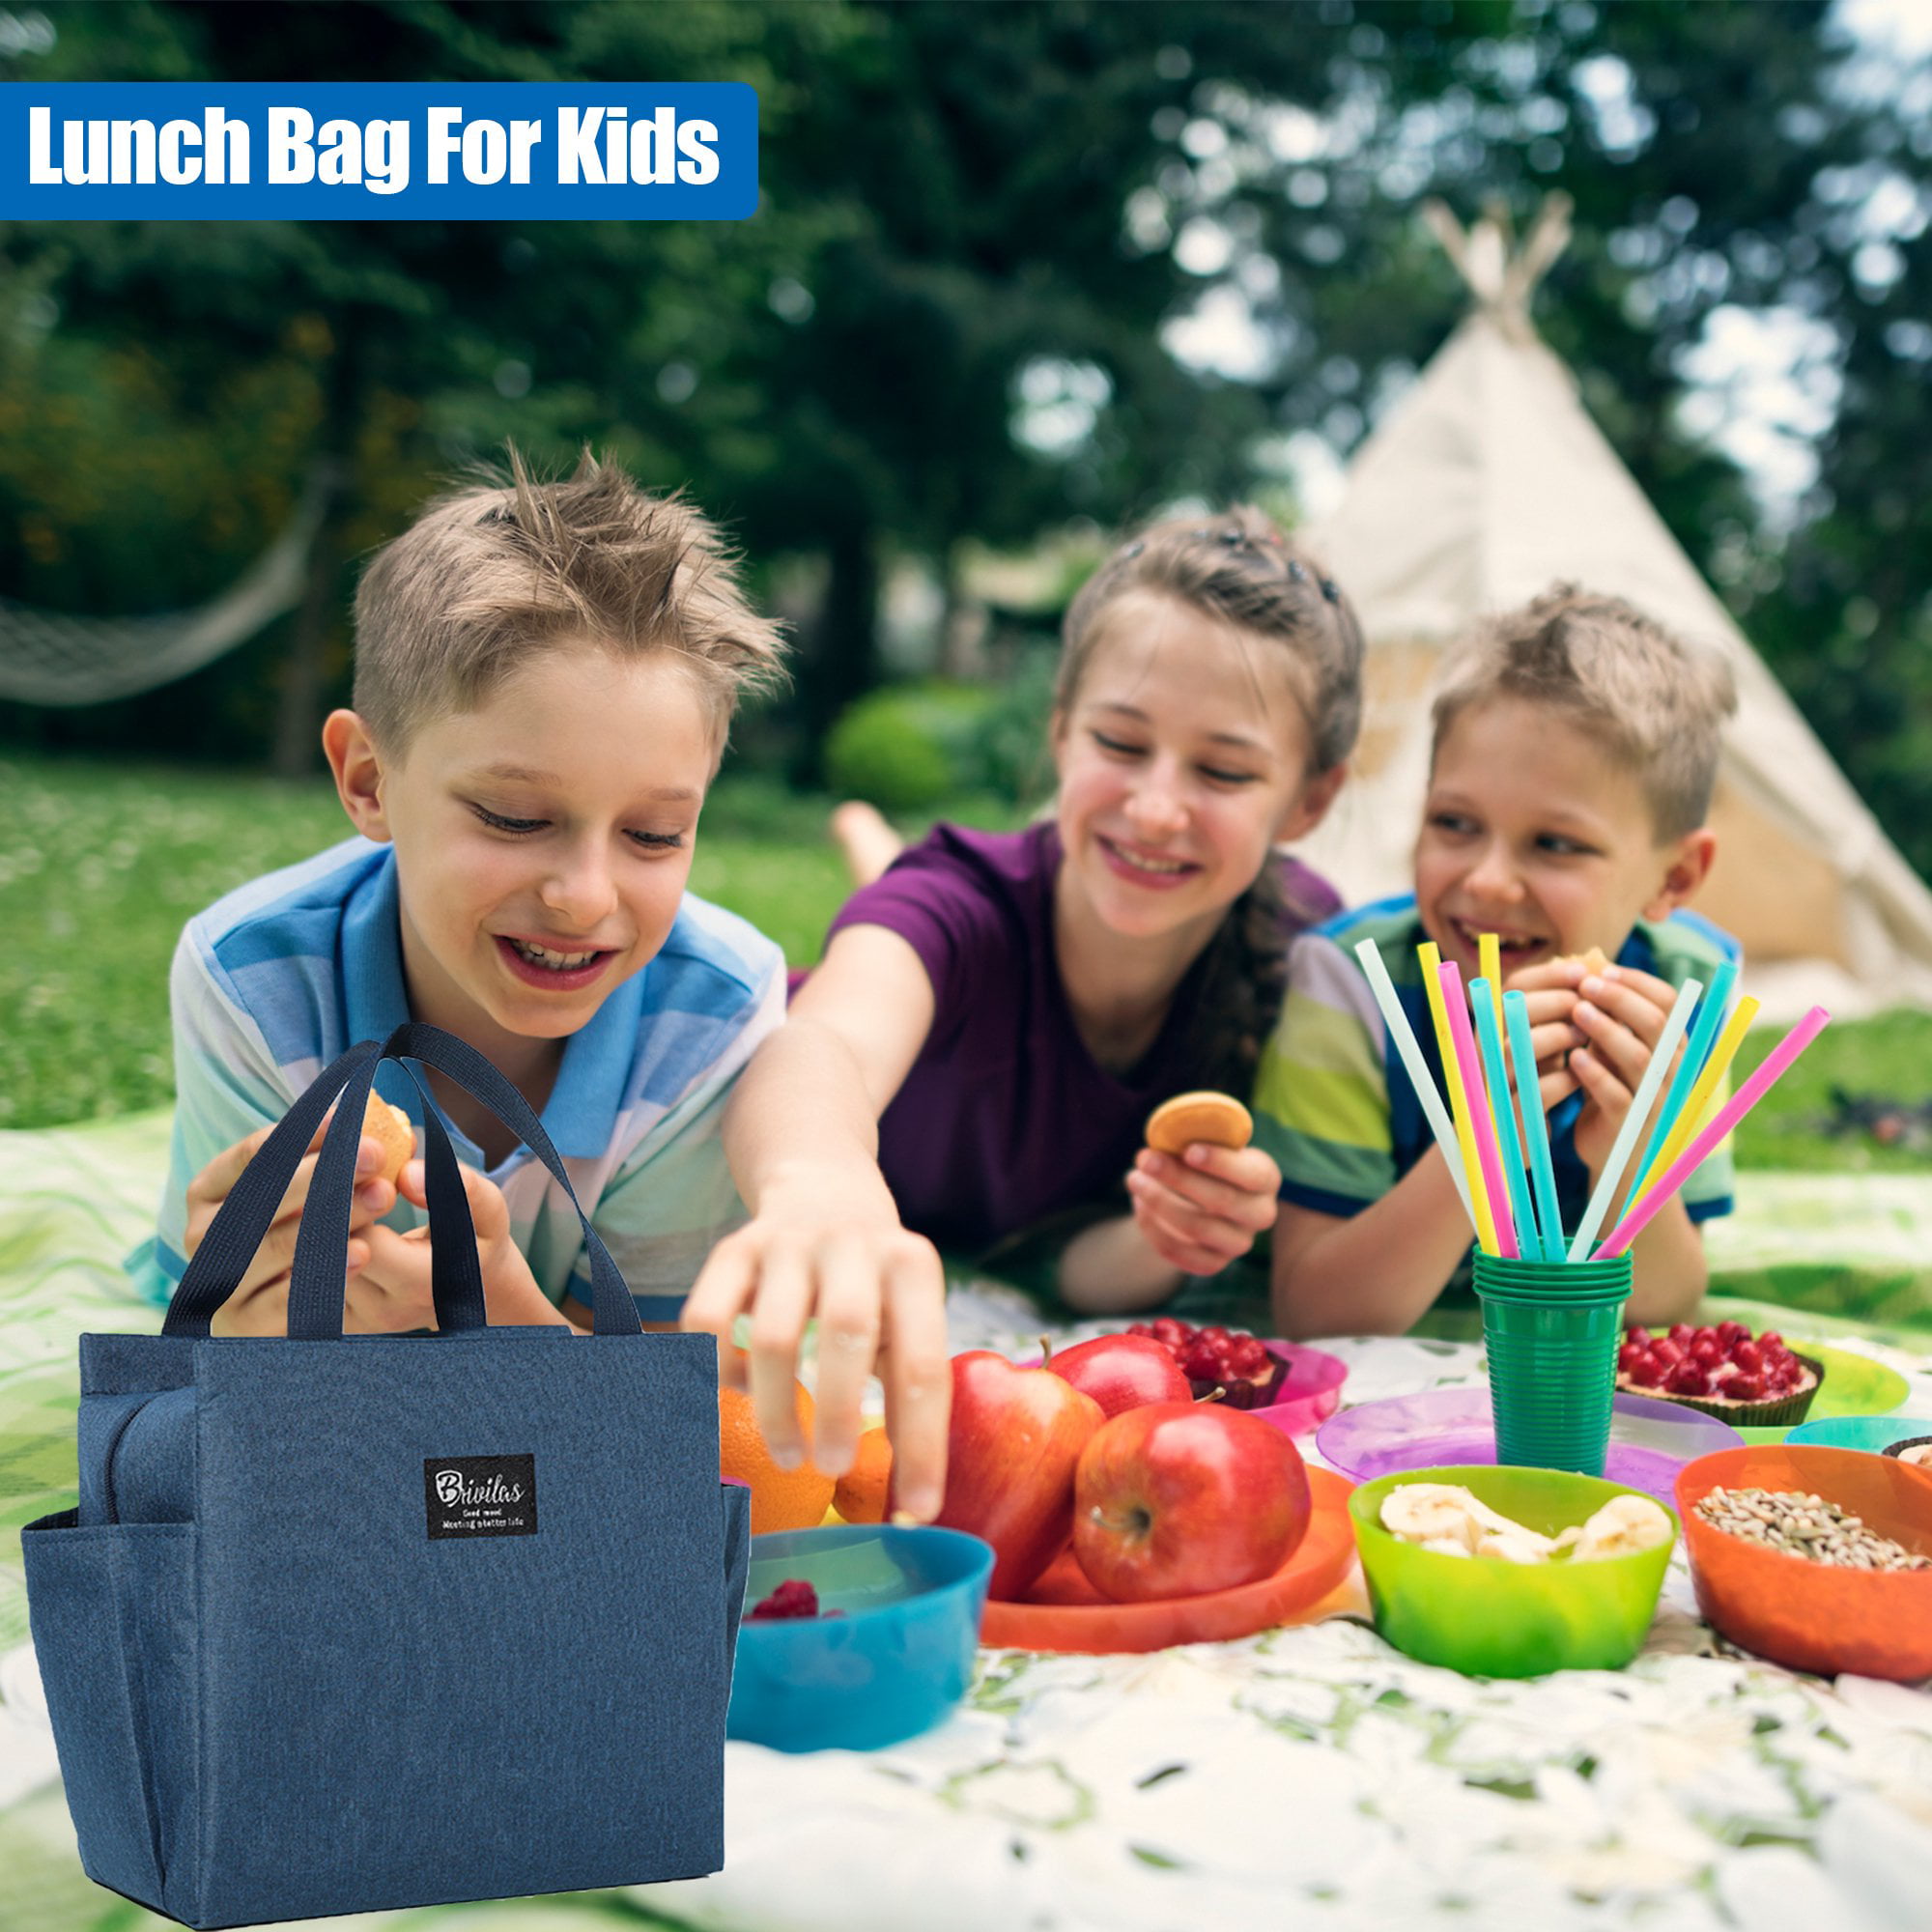 Put Your Childhood Lunch Box to Shame with This Insulated Lunch Tote